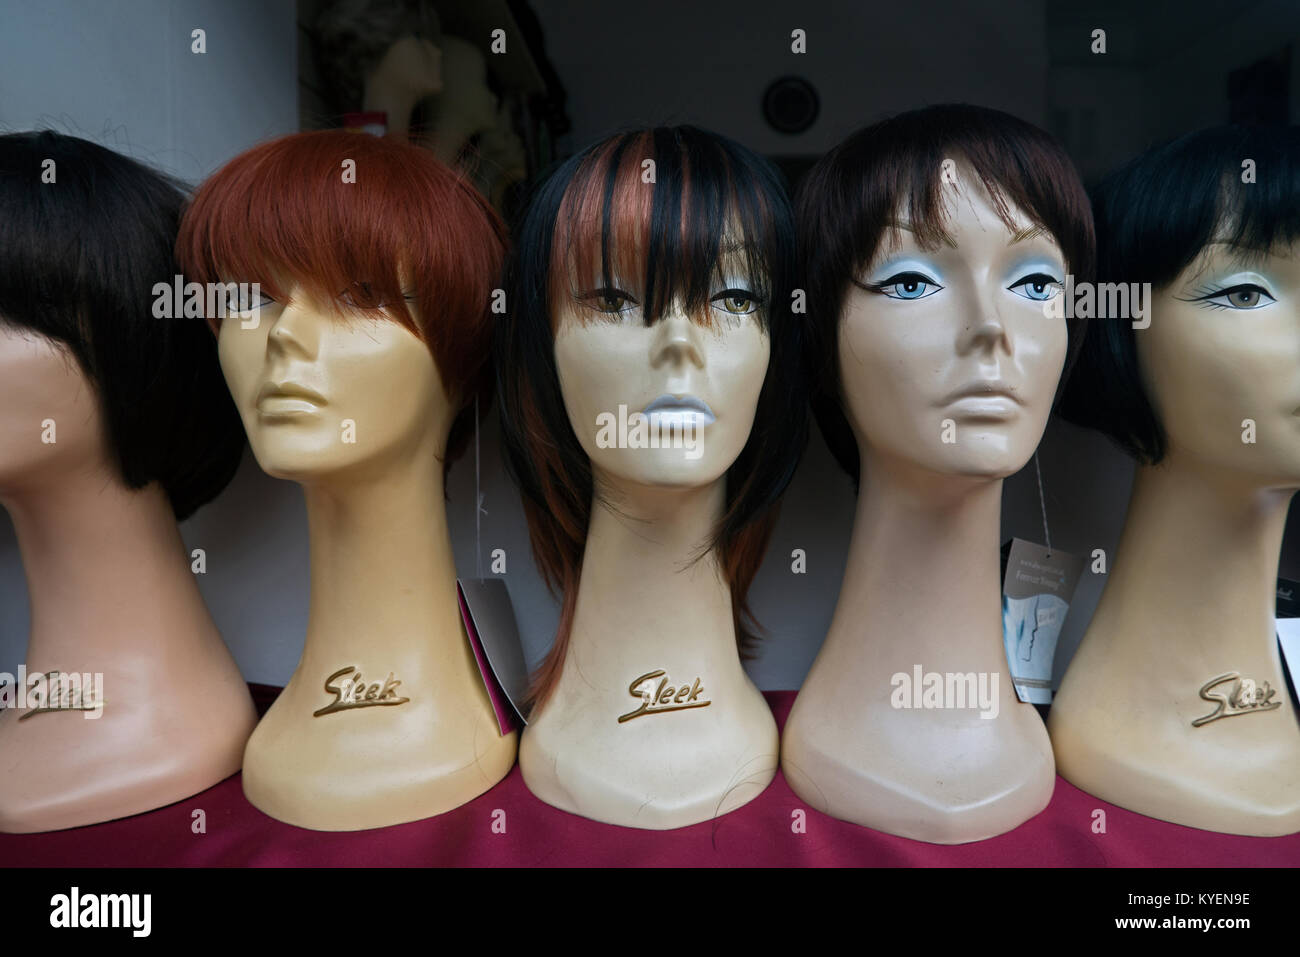 Female mannequin heads with wigs on display in a shop window in Edinburgh, Scotland, UK. Stock Photo